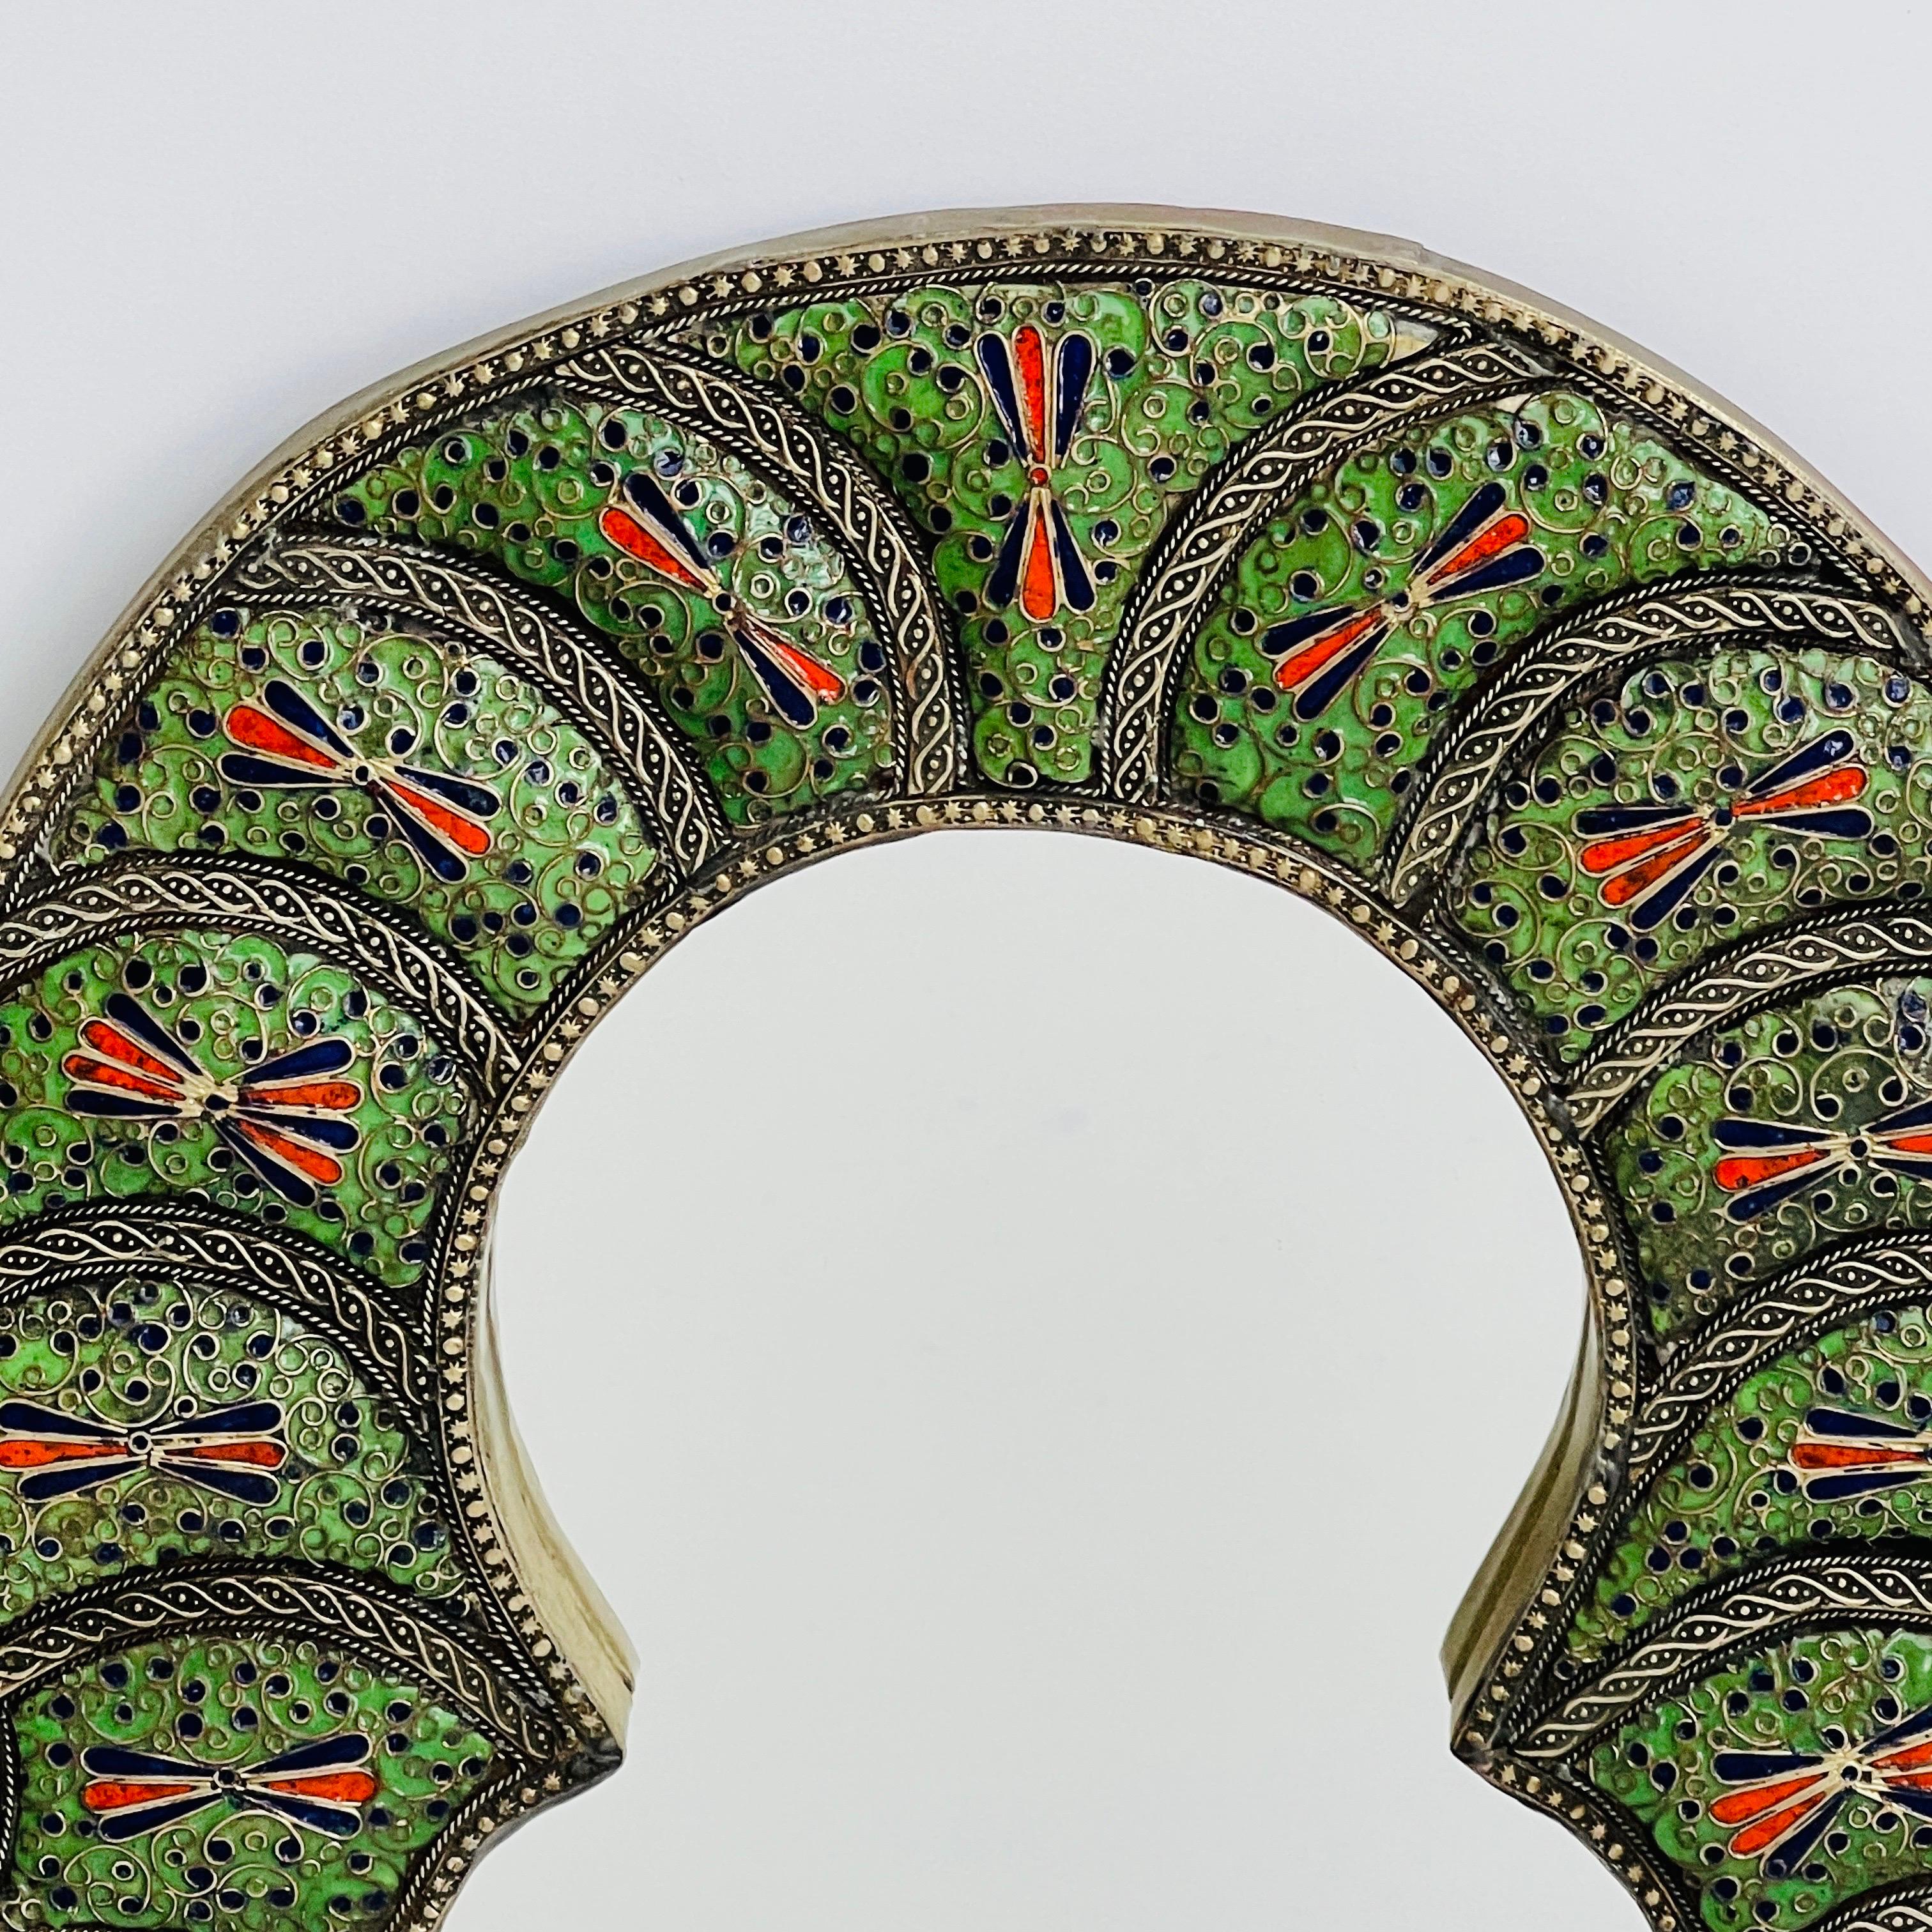 Mid-20th Century Moorish Arch Mirror in Enameled Cloisonné with Bone Inlays, Morocco c. 1950's For Sale